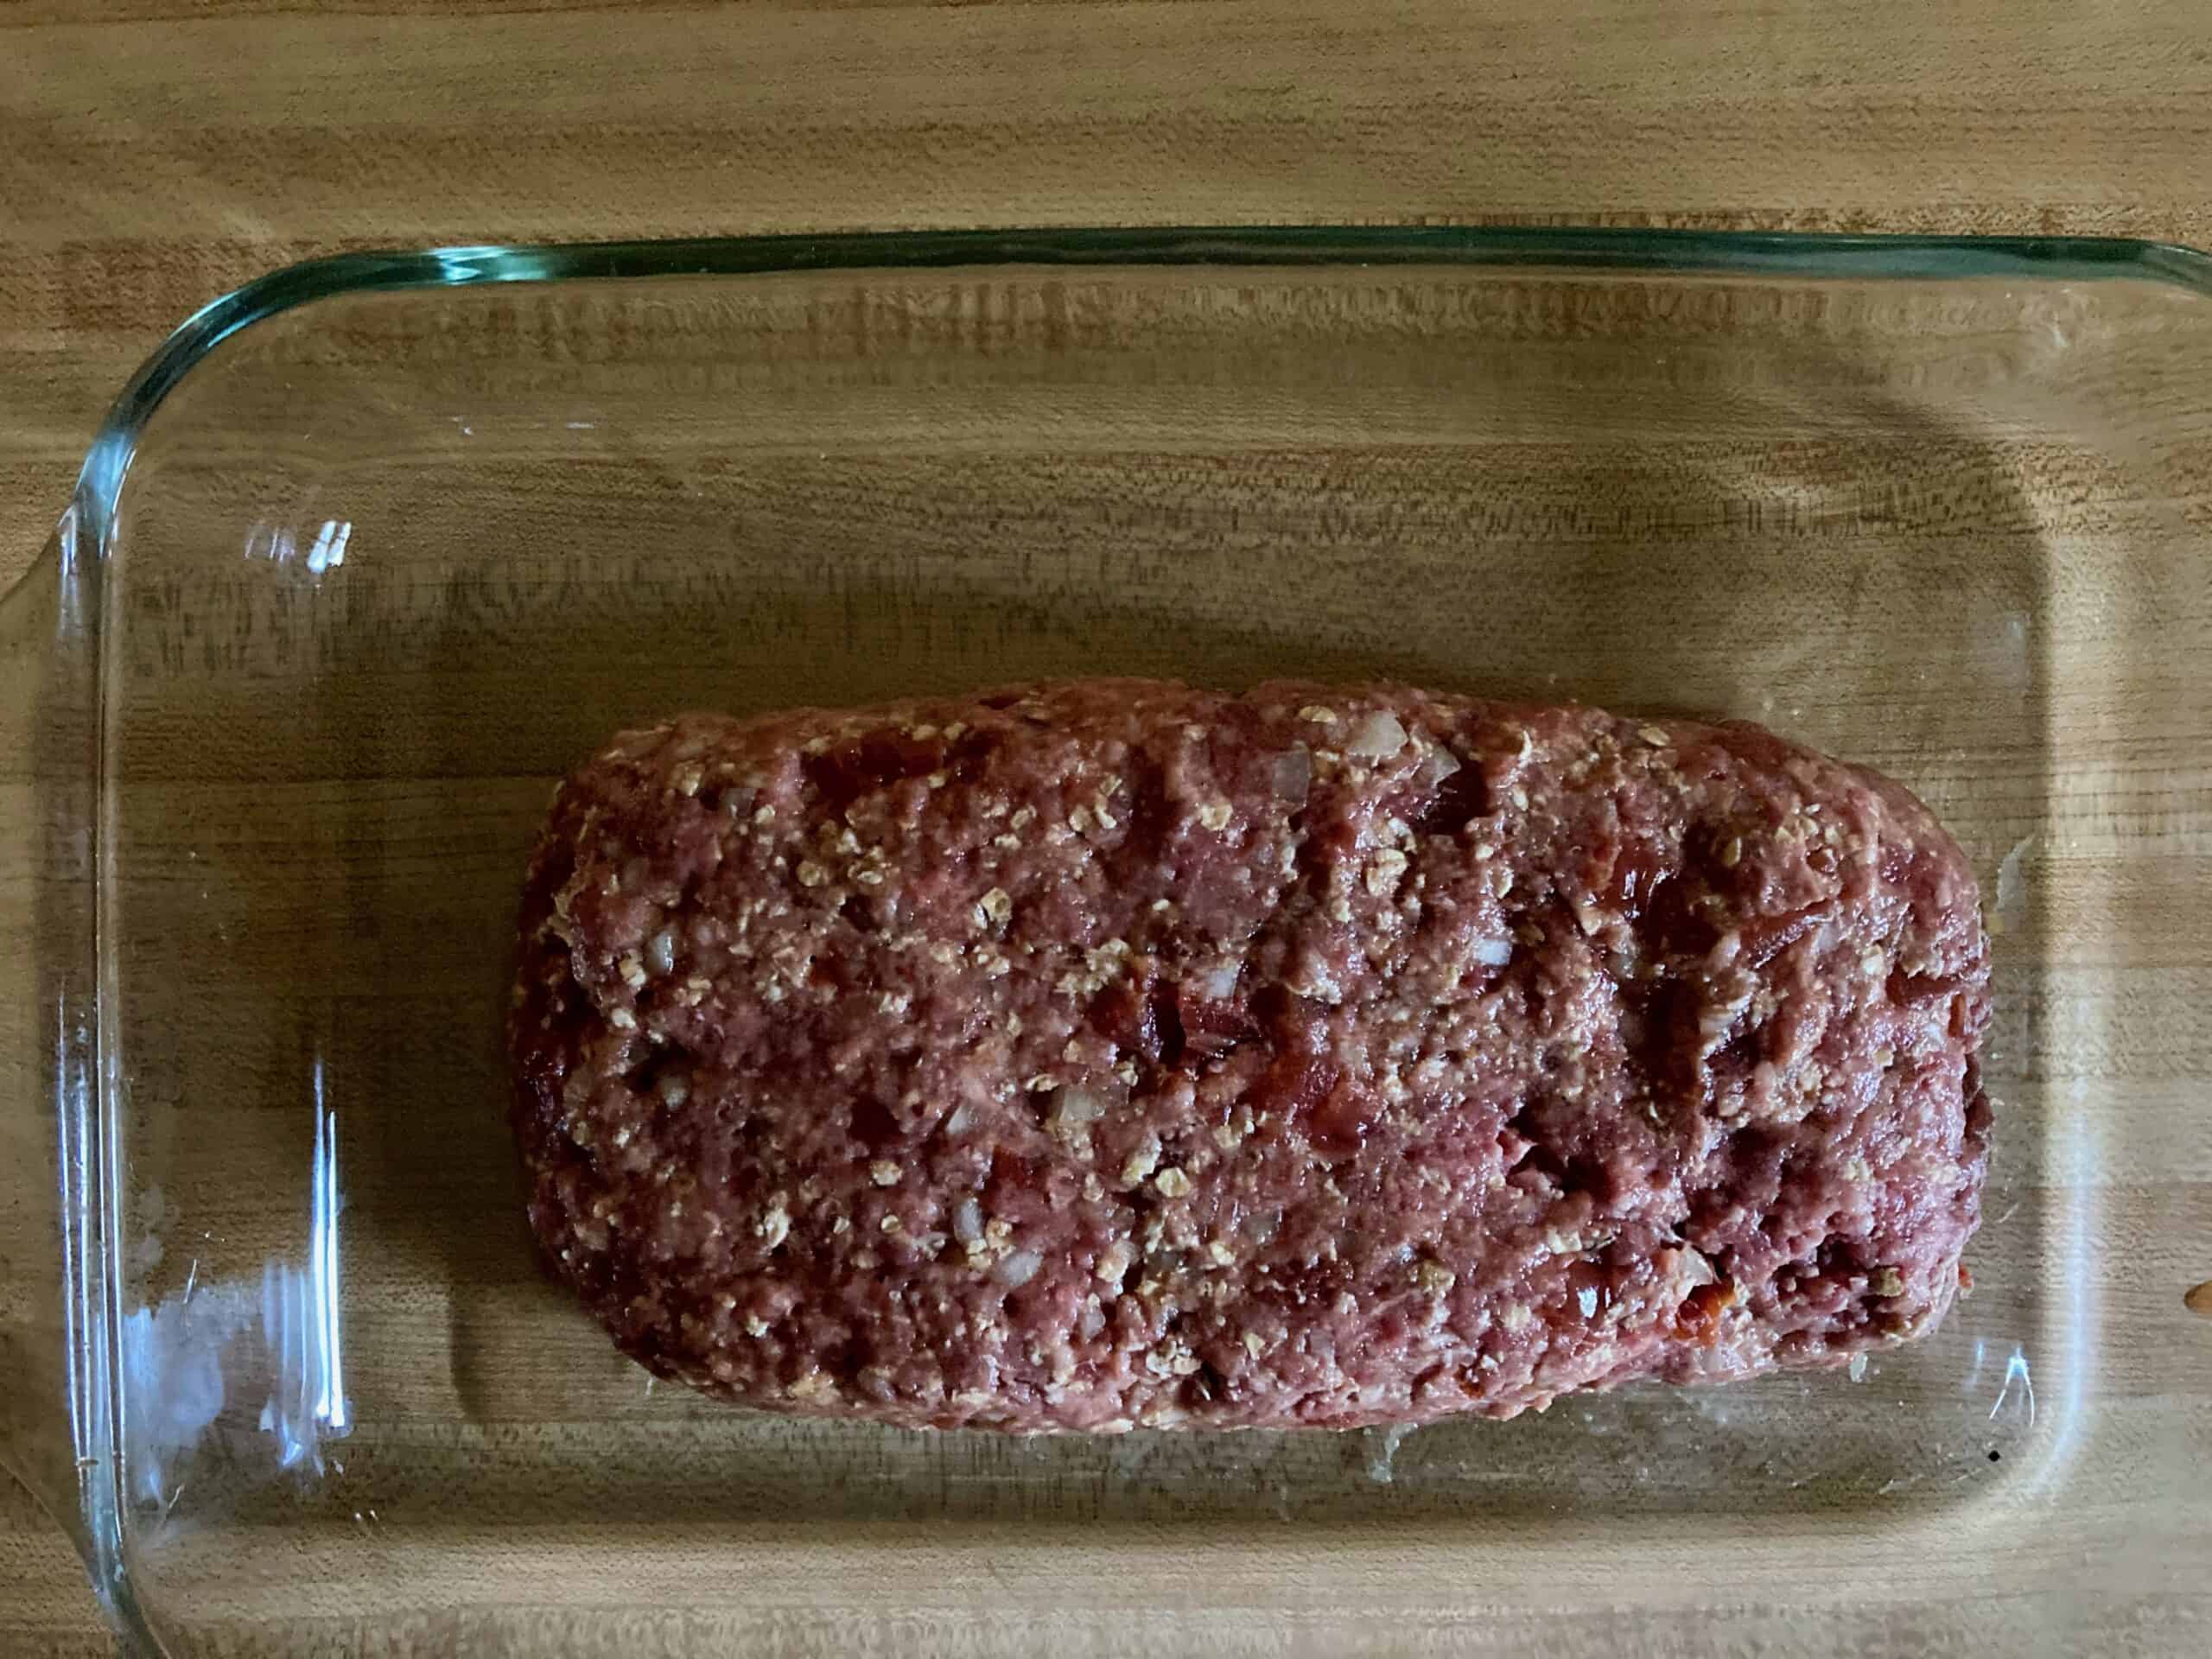 Raw meatloaf in a glass baking dish